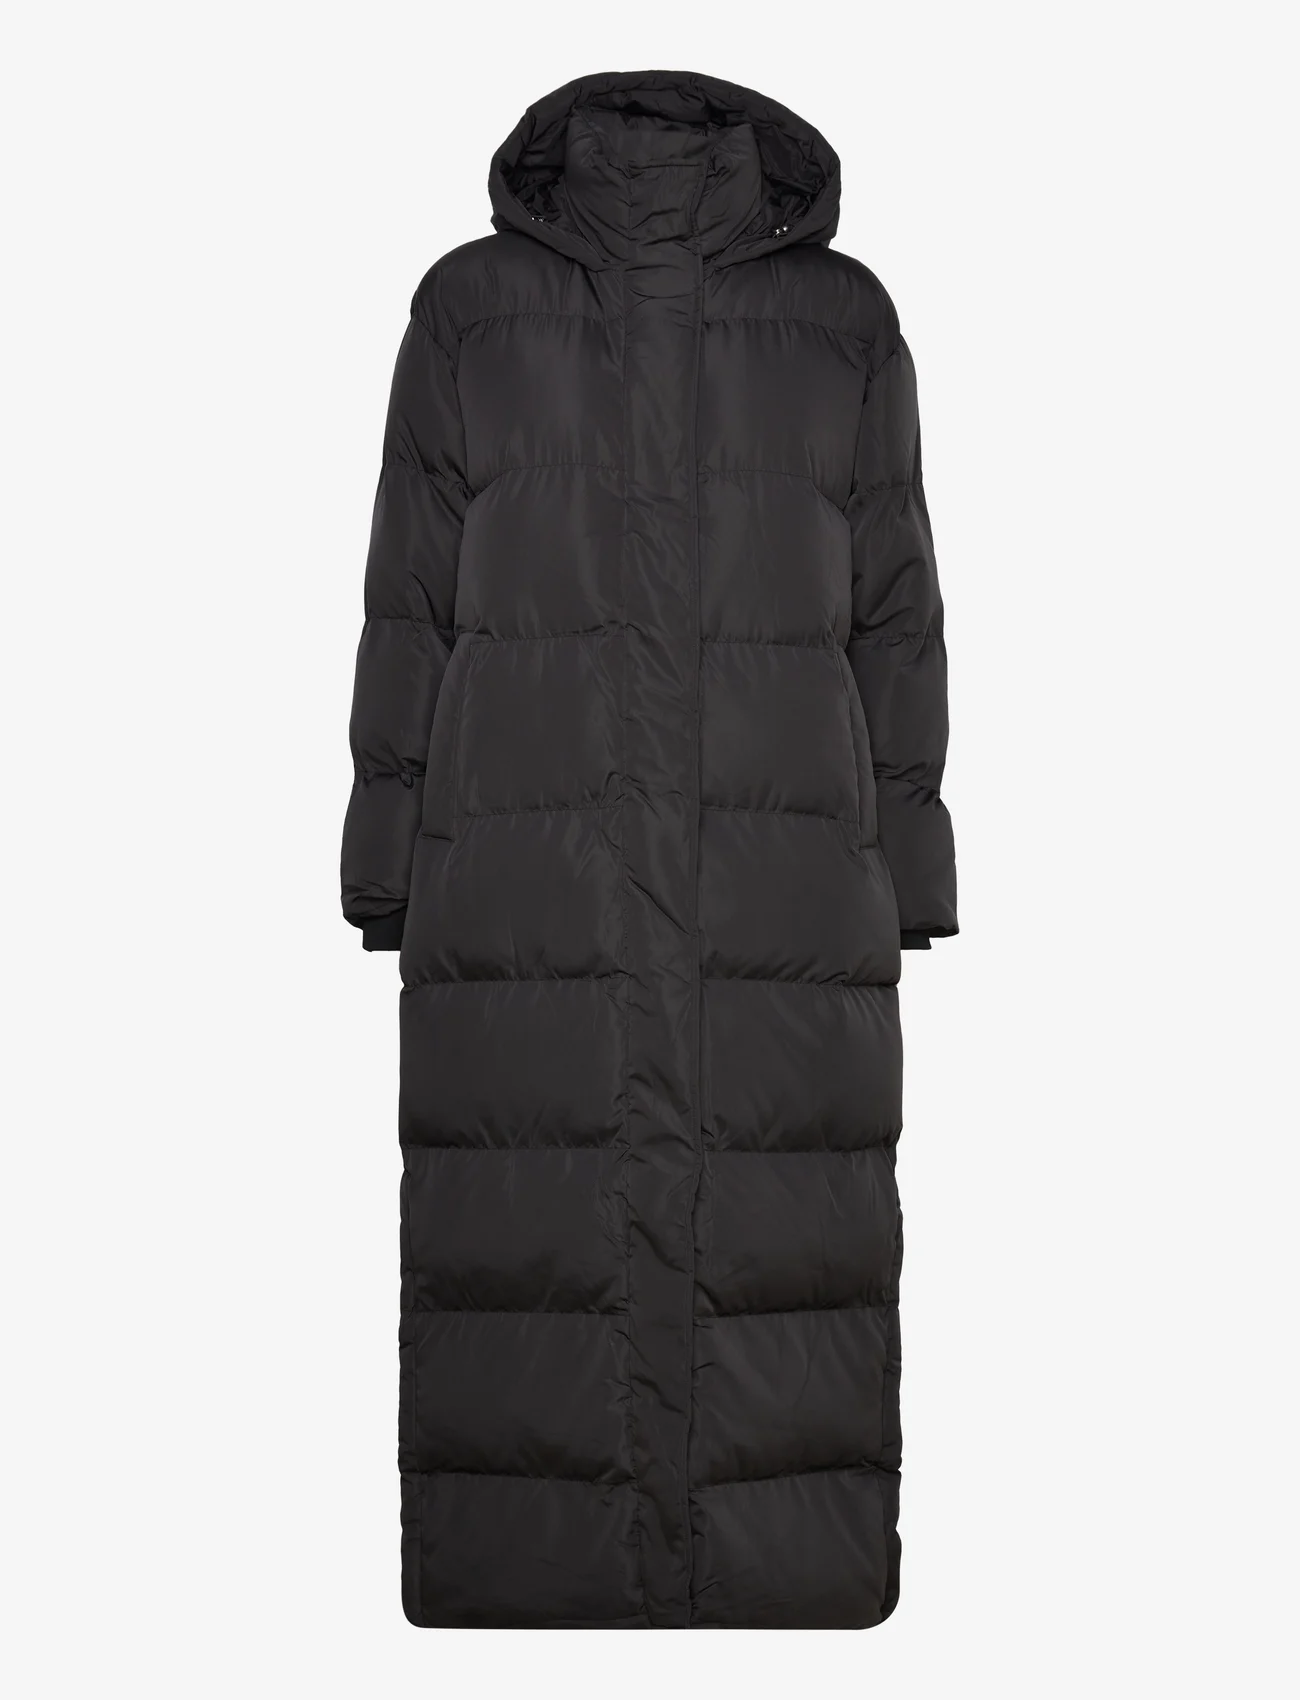 Superdry - MAXI HOODED PUFFER COAT - winter jackets - black - 0